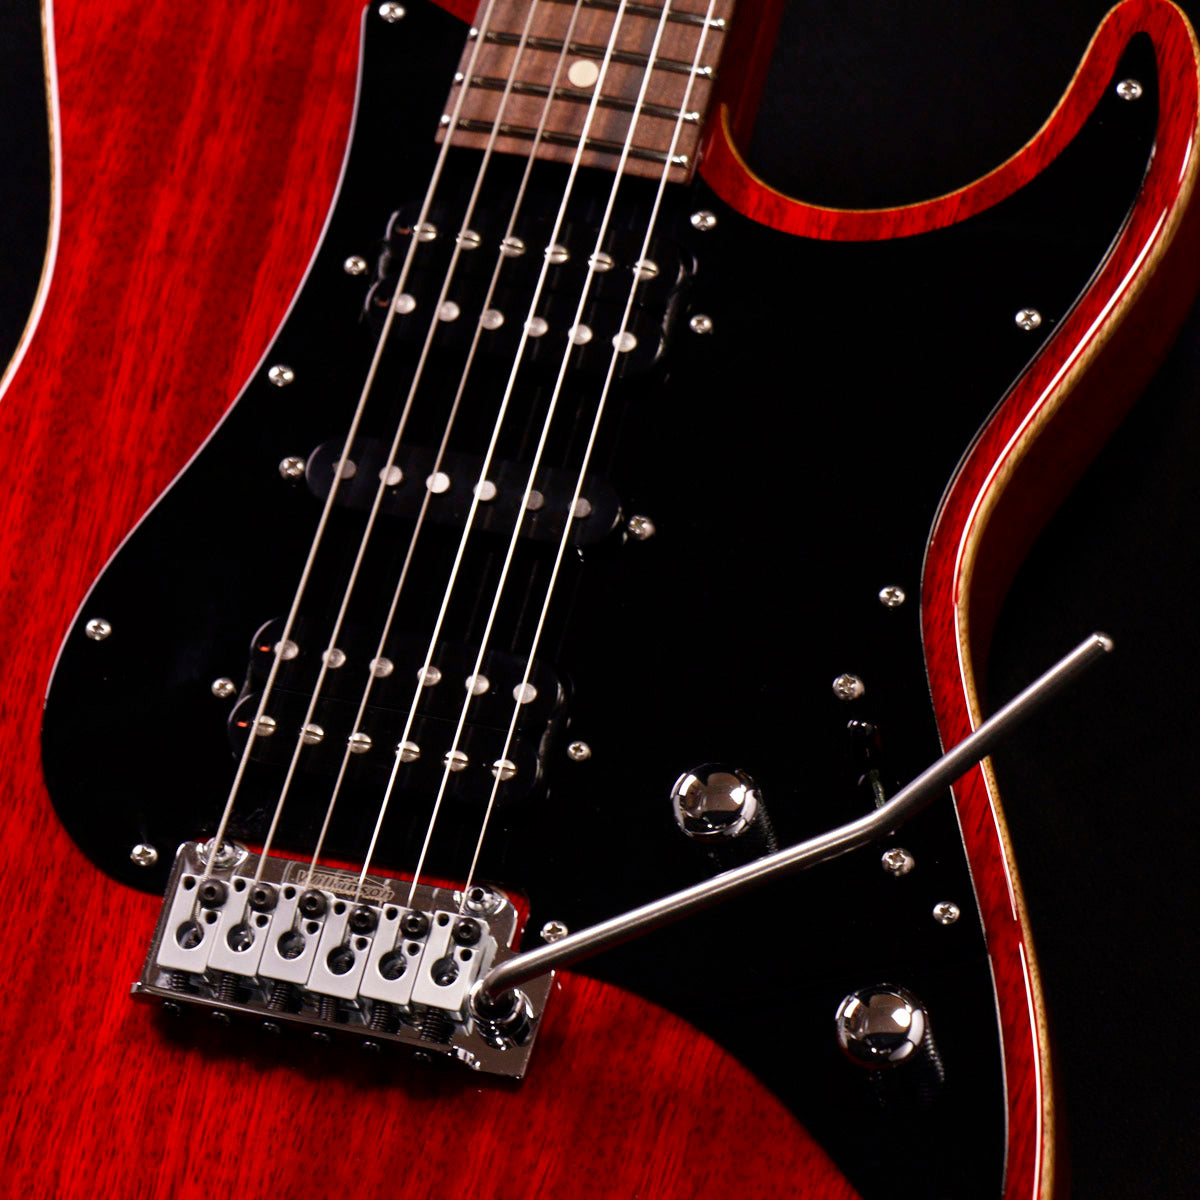 [SN 61038] USED Suhr / John Suhr Signature Standard Trans Red [12]